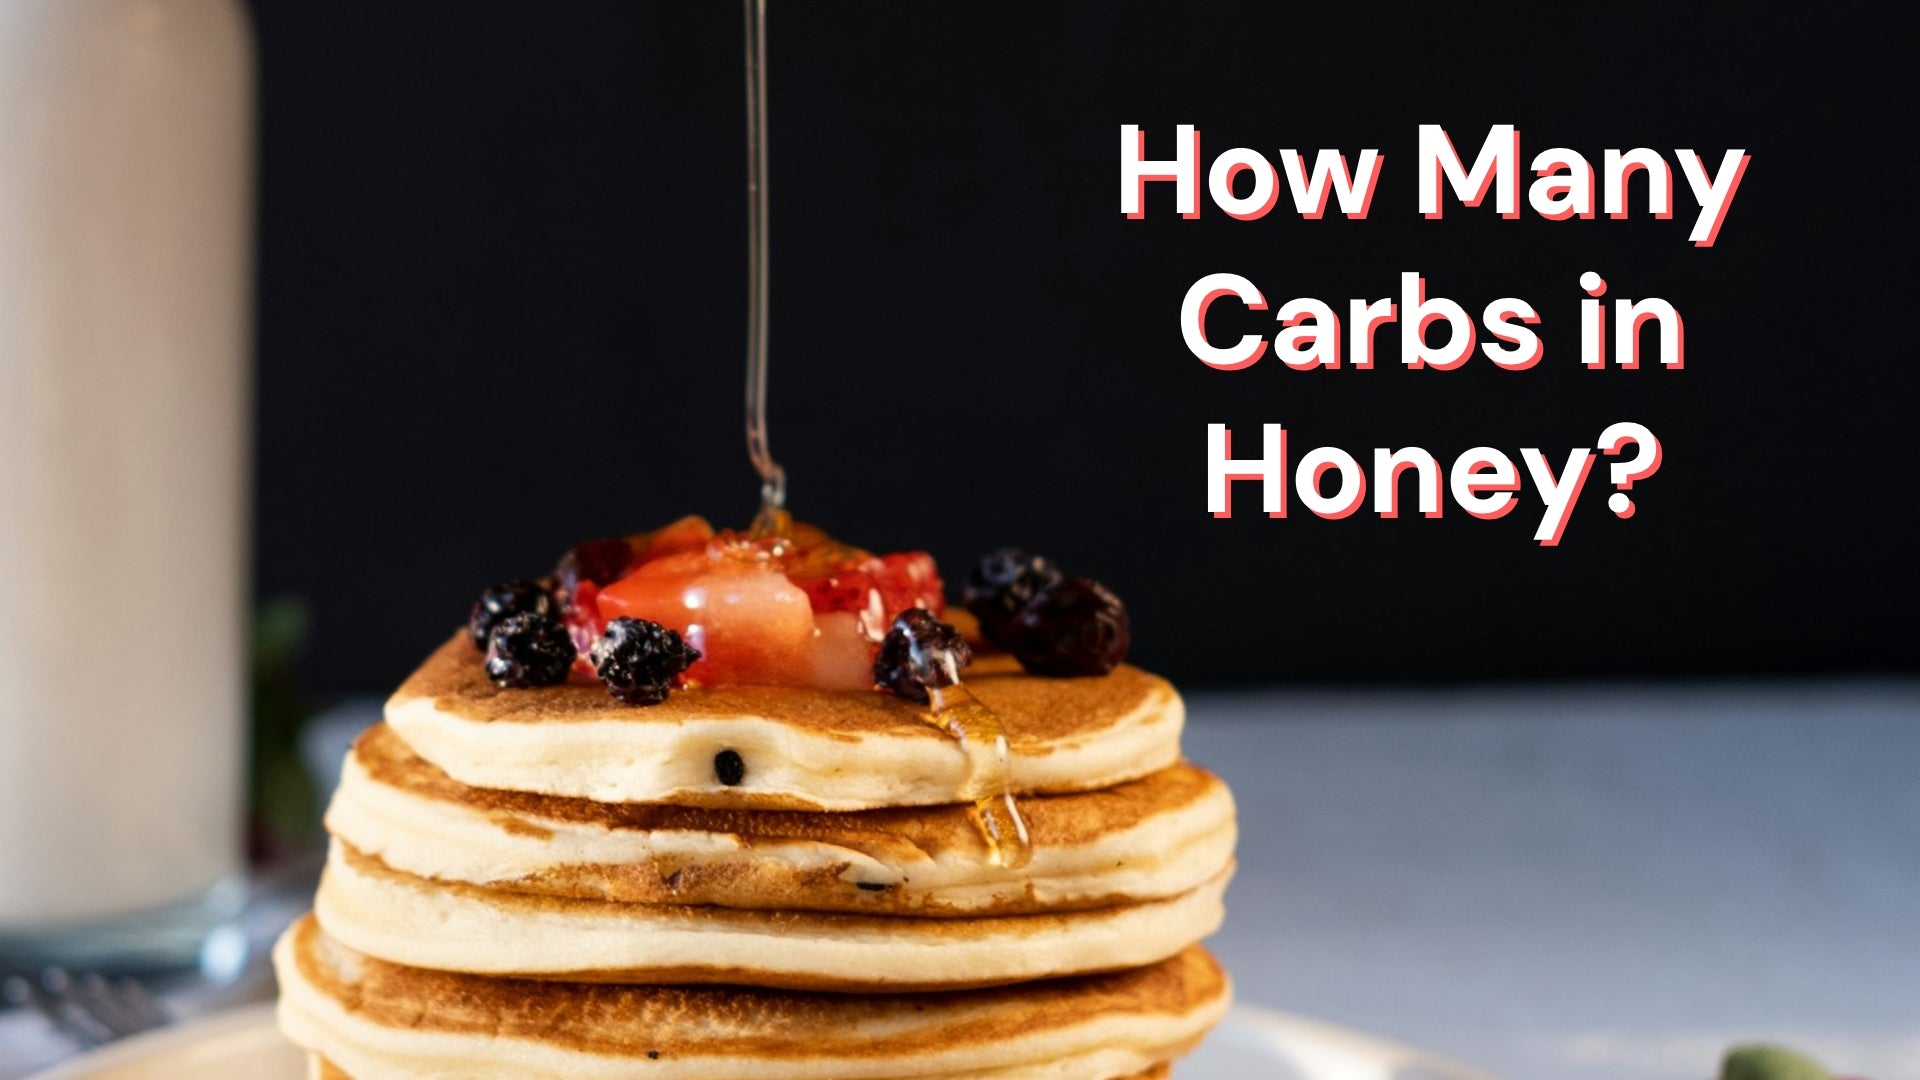 How Many Carbs Are In Honey?